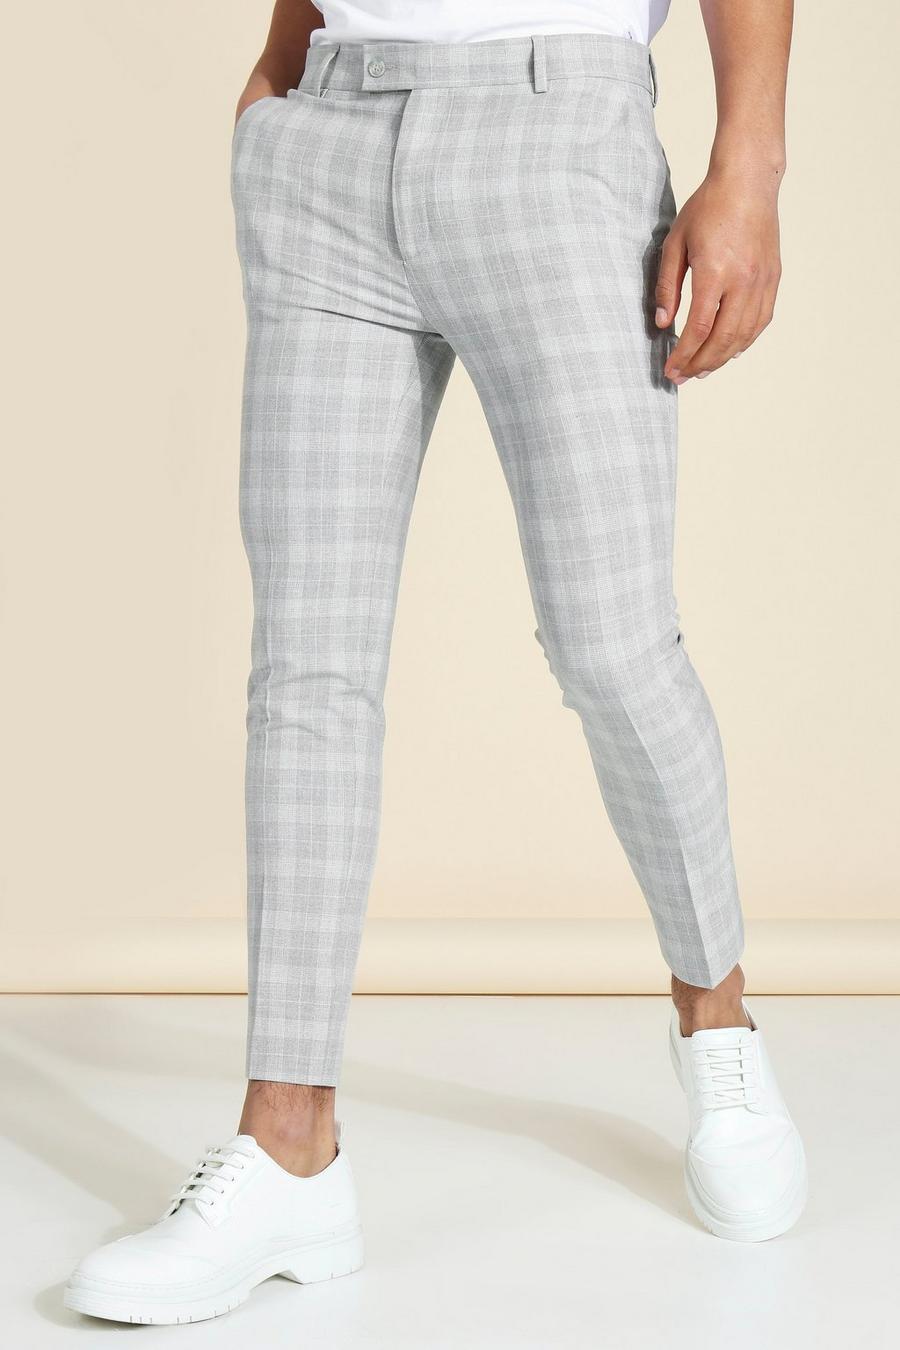 Grey Super Skinny Crop Check Tailored Pants